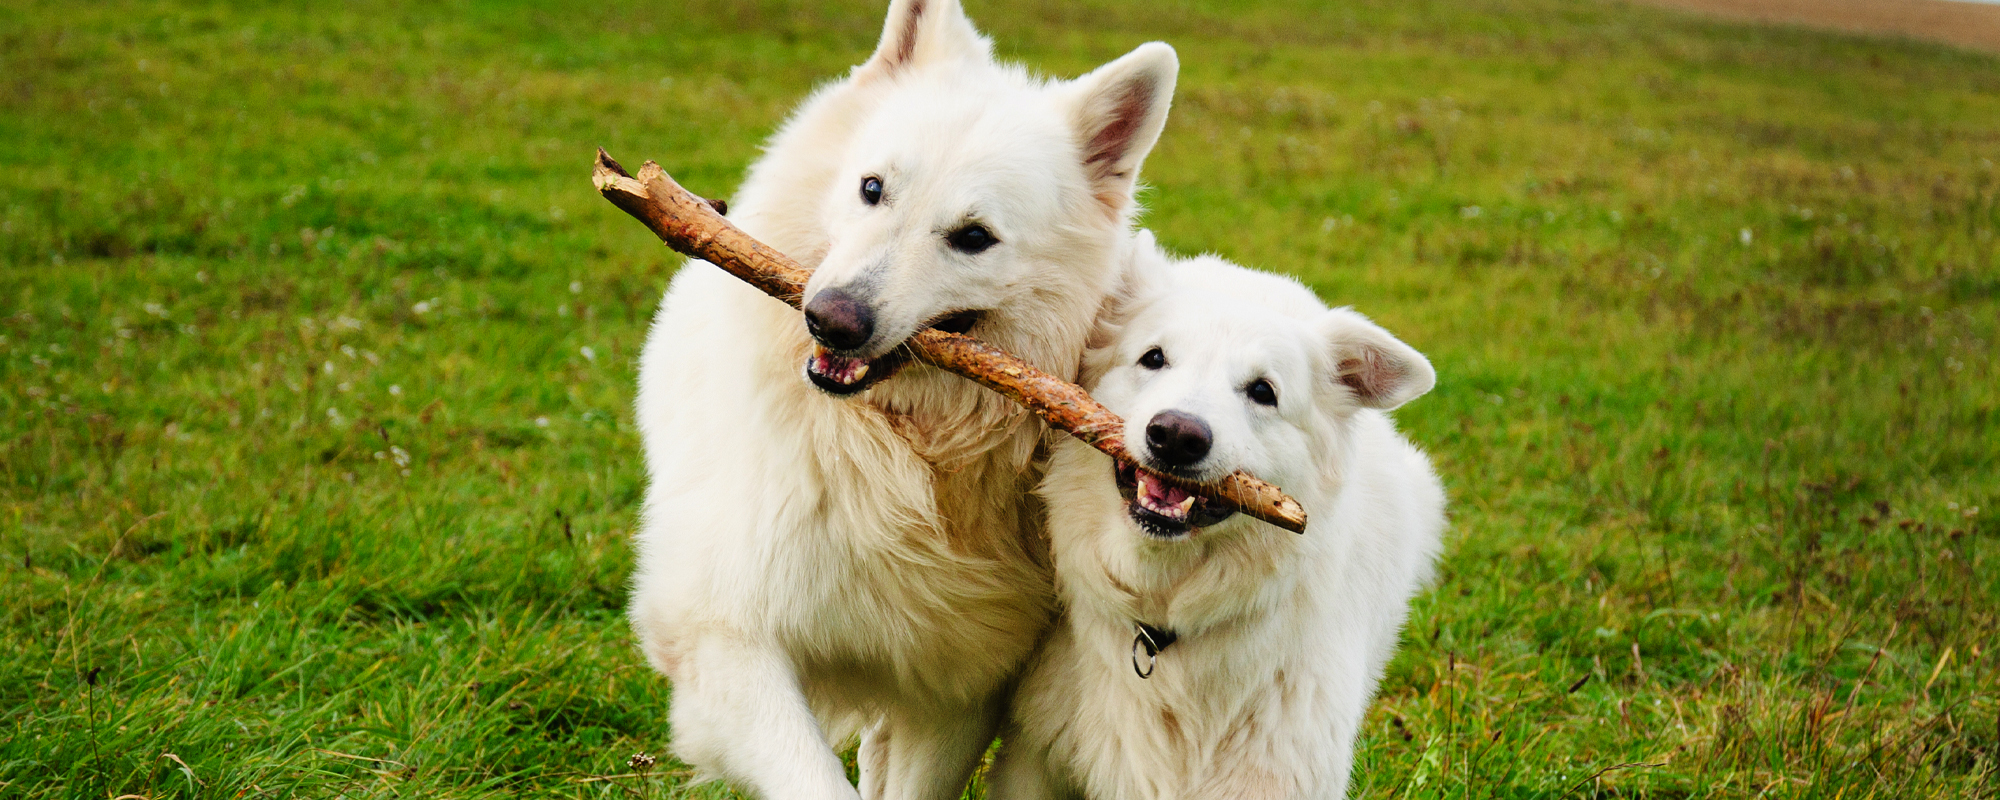 Two Dogs With Stick Header